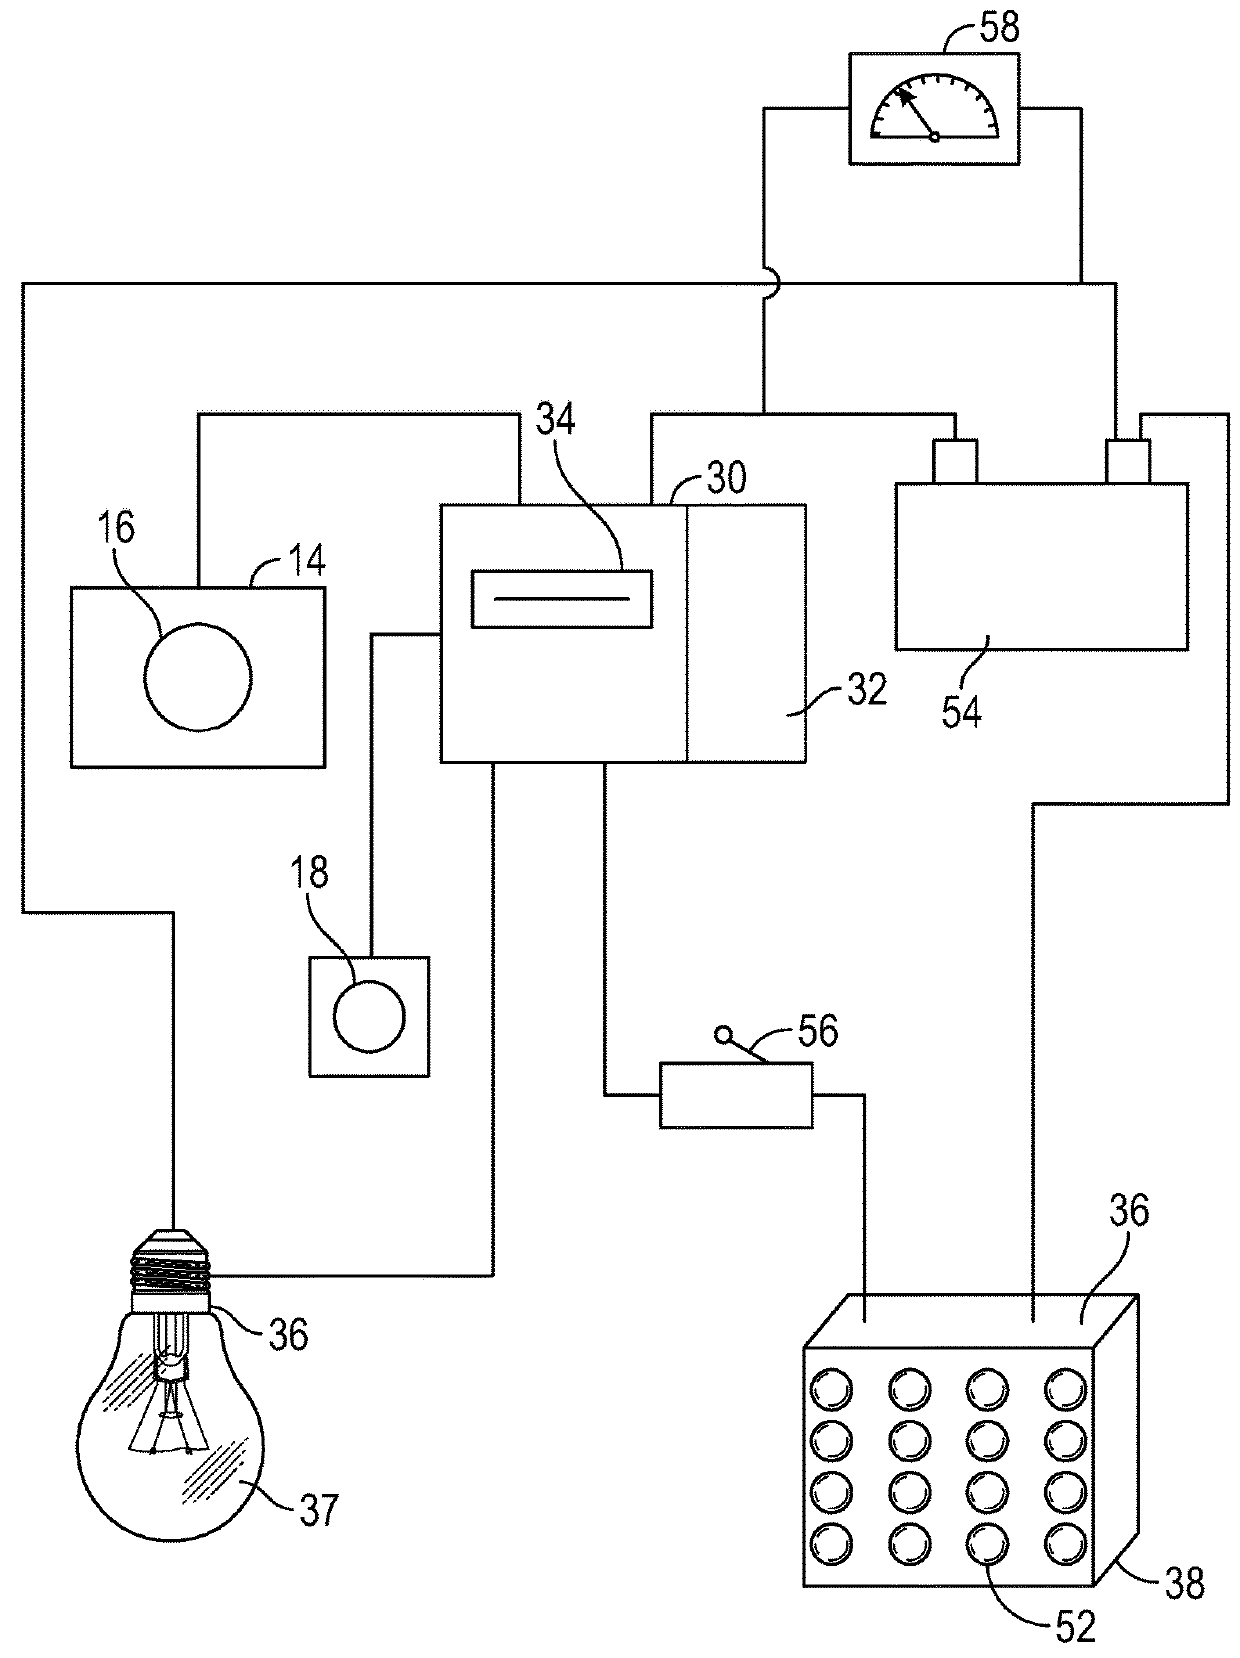 Methods and systems for controlling light